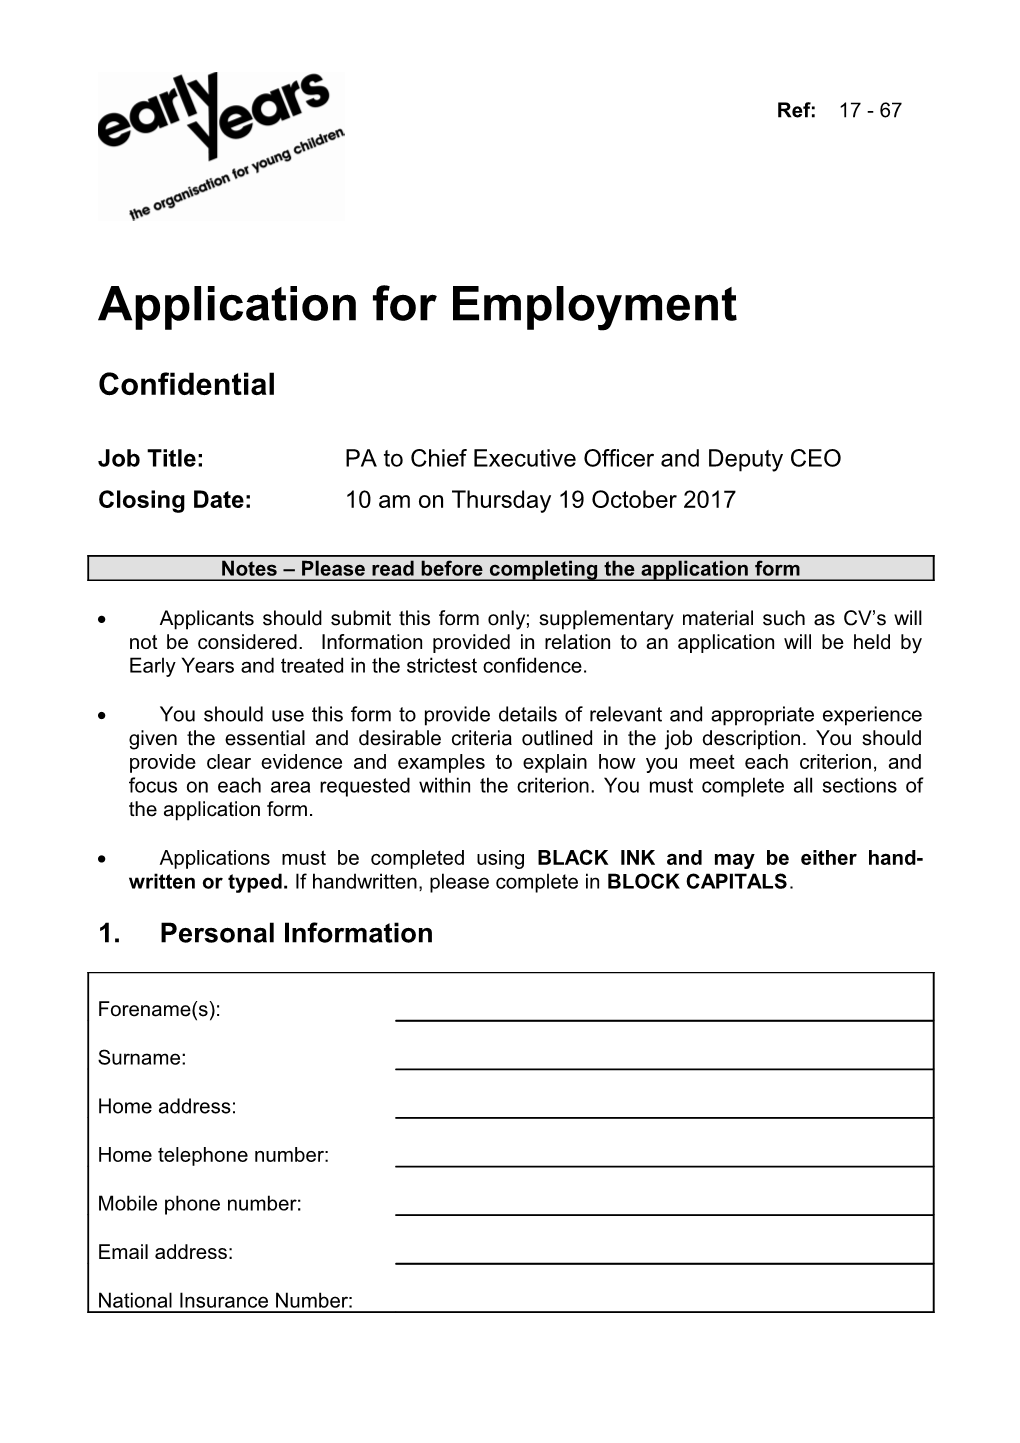 Application for Employment s88